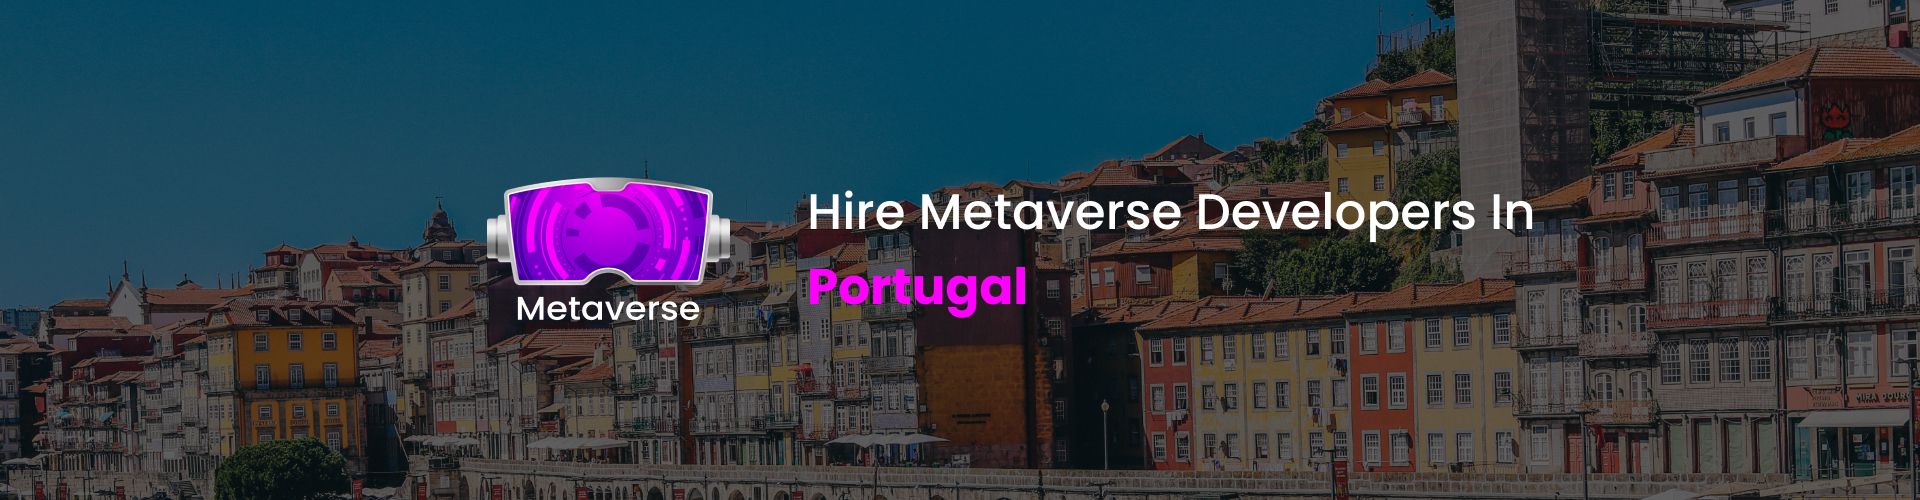 metaverse developers in portugal